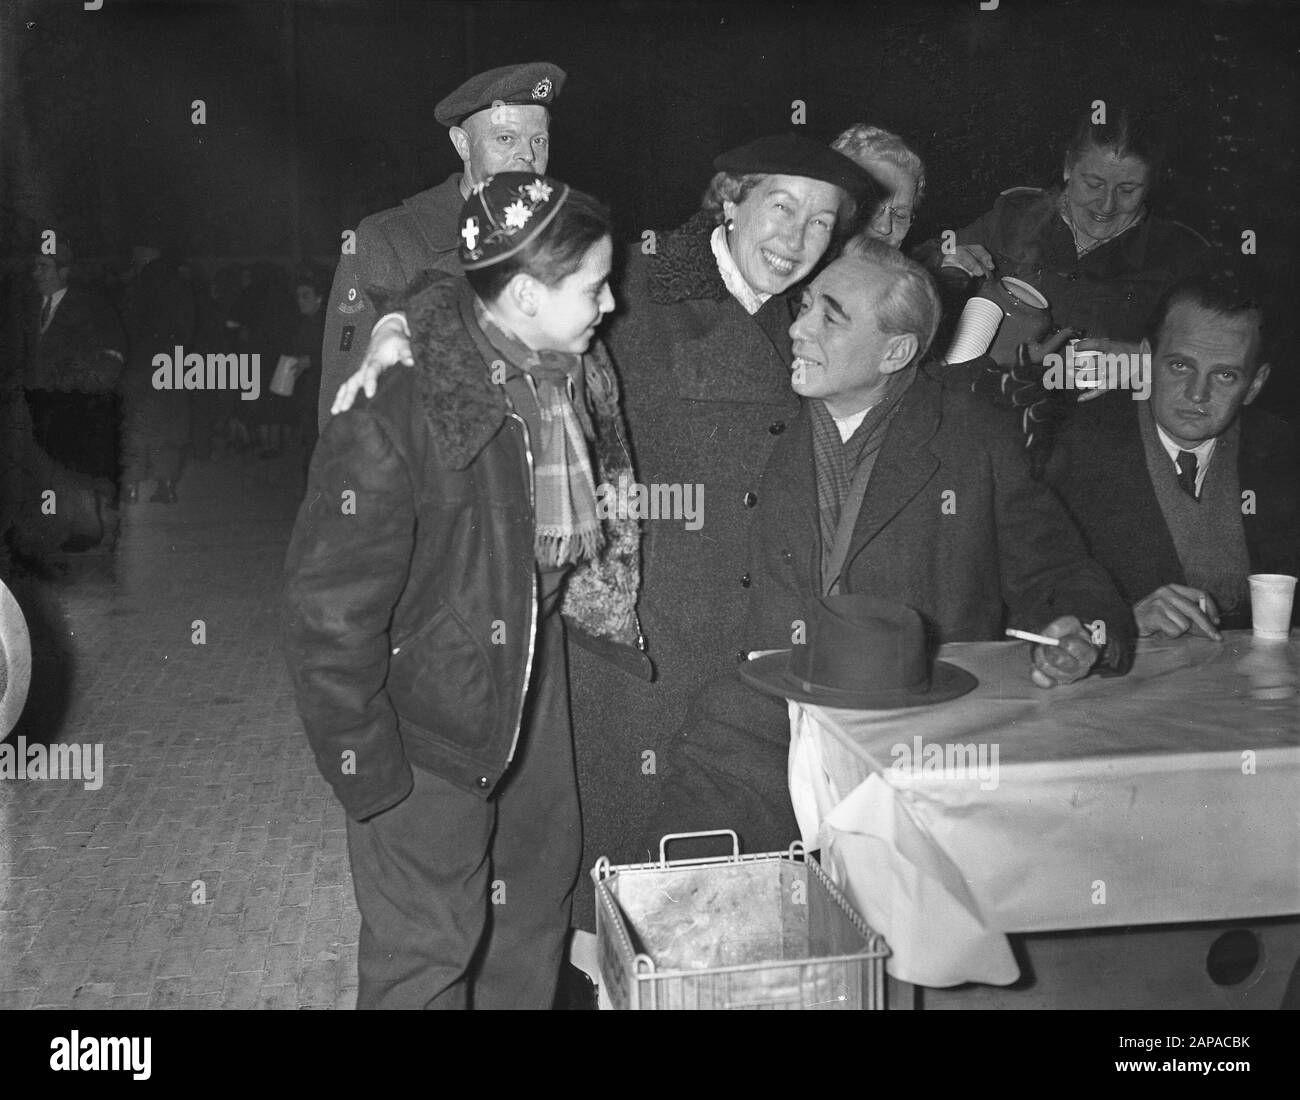 Arrival third group of Hungarian refugees/discolored Date: November 25, 1956 Keywords: ARRIVE, REFIZE Stock Photo